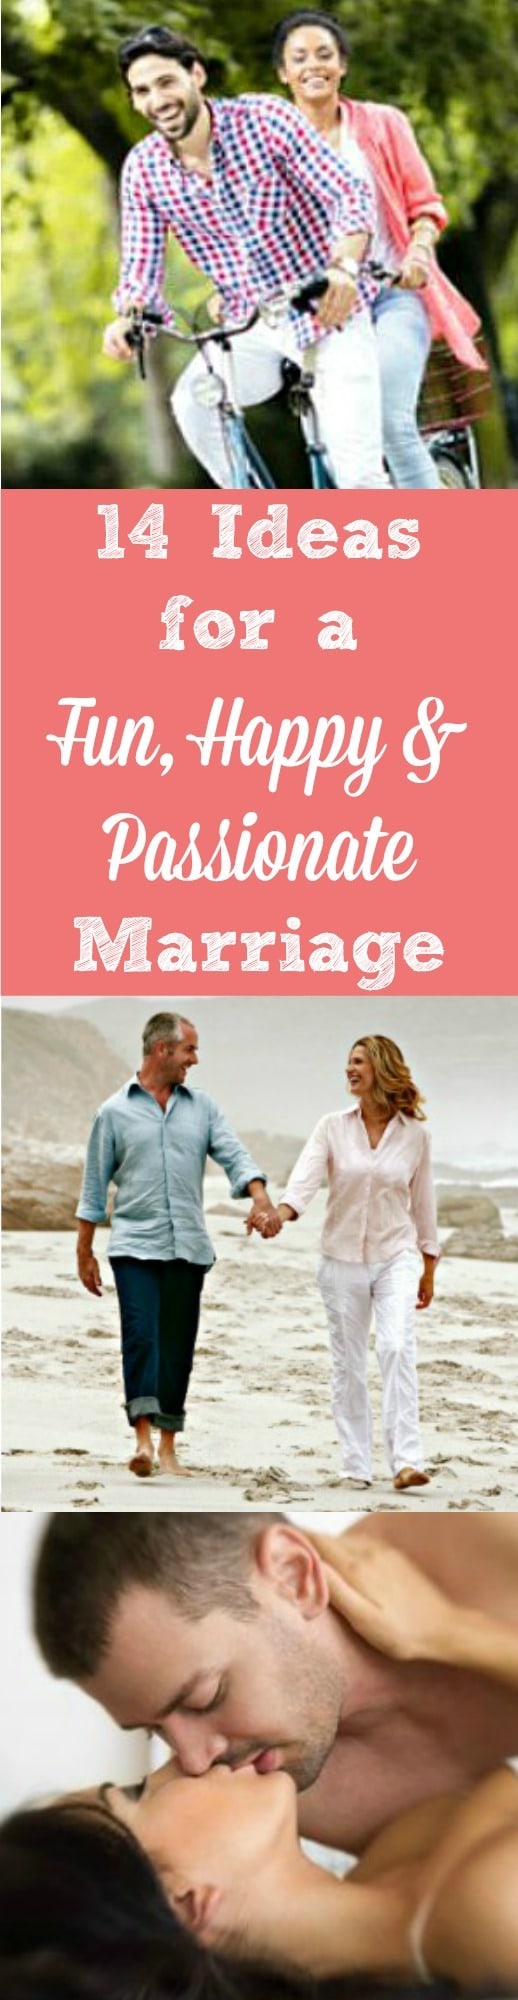 14 Tips, ideas and resources for creating a fun, happy and passionate marriage. Encouragement | Advice | Married life